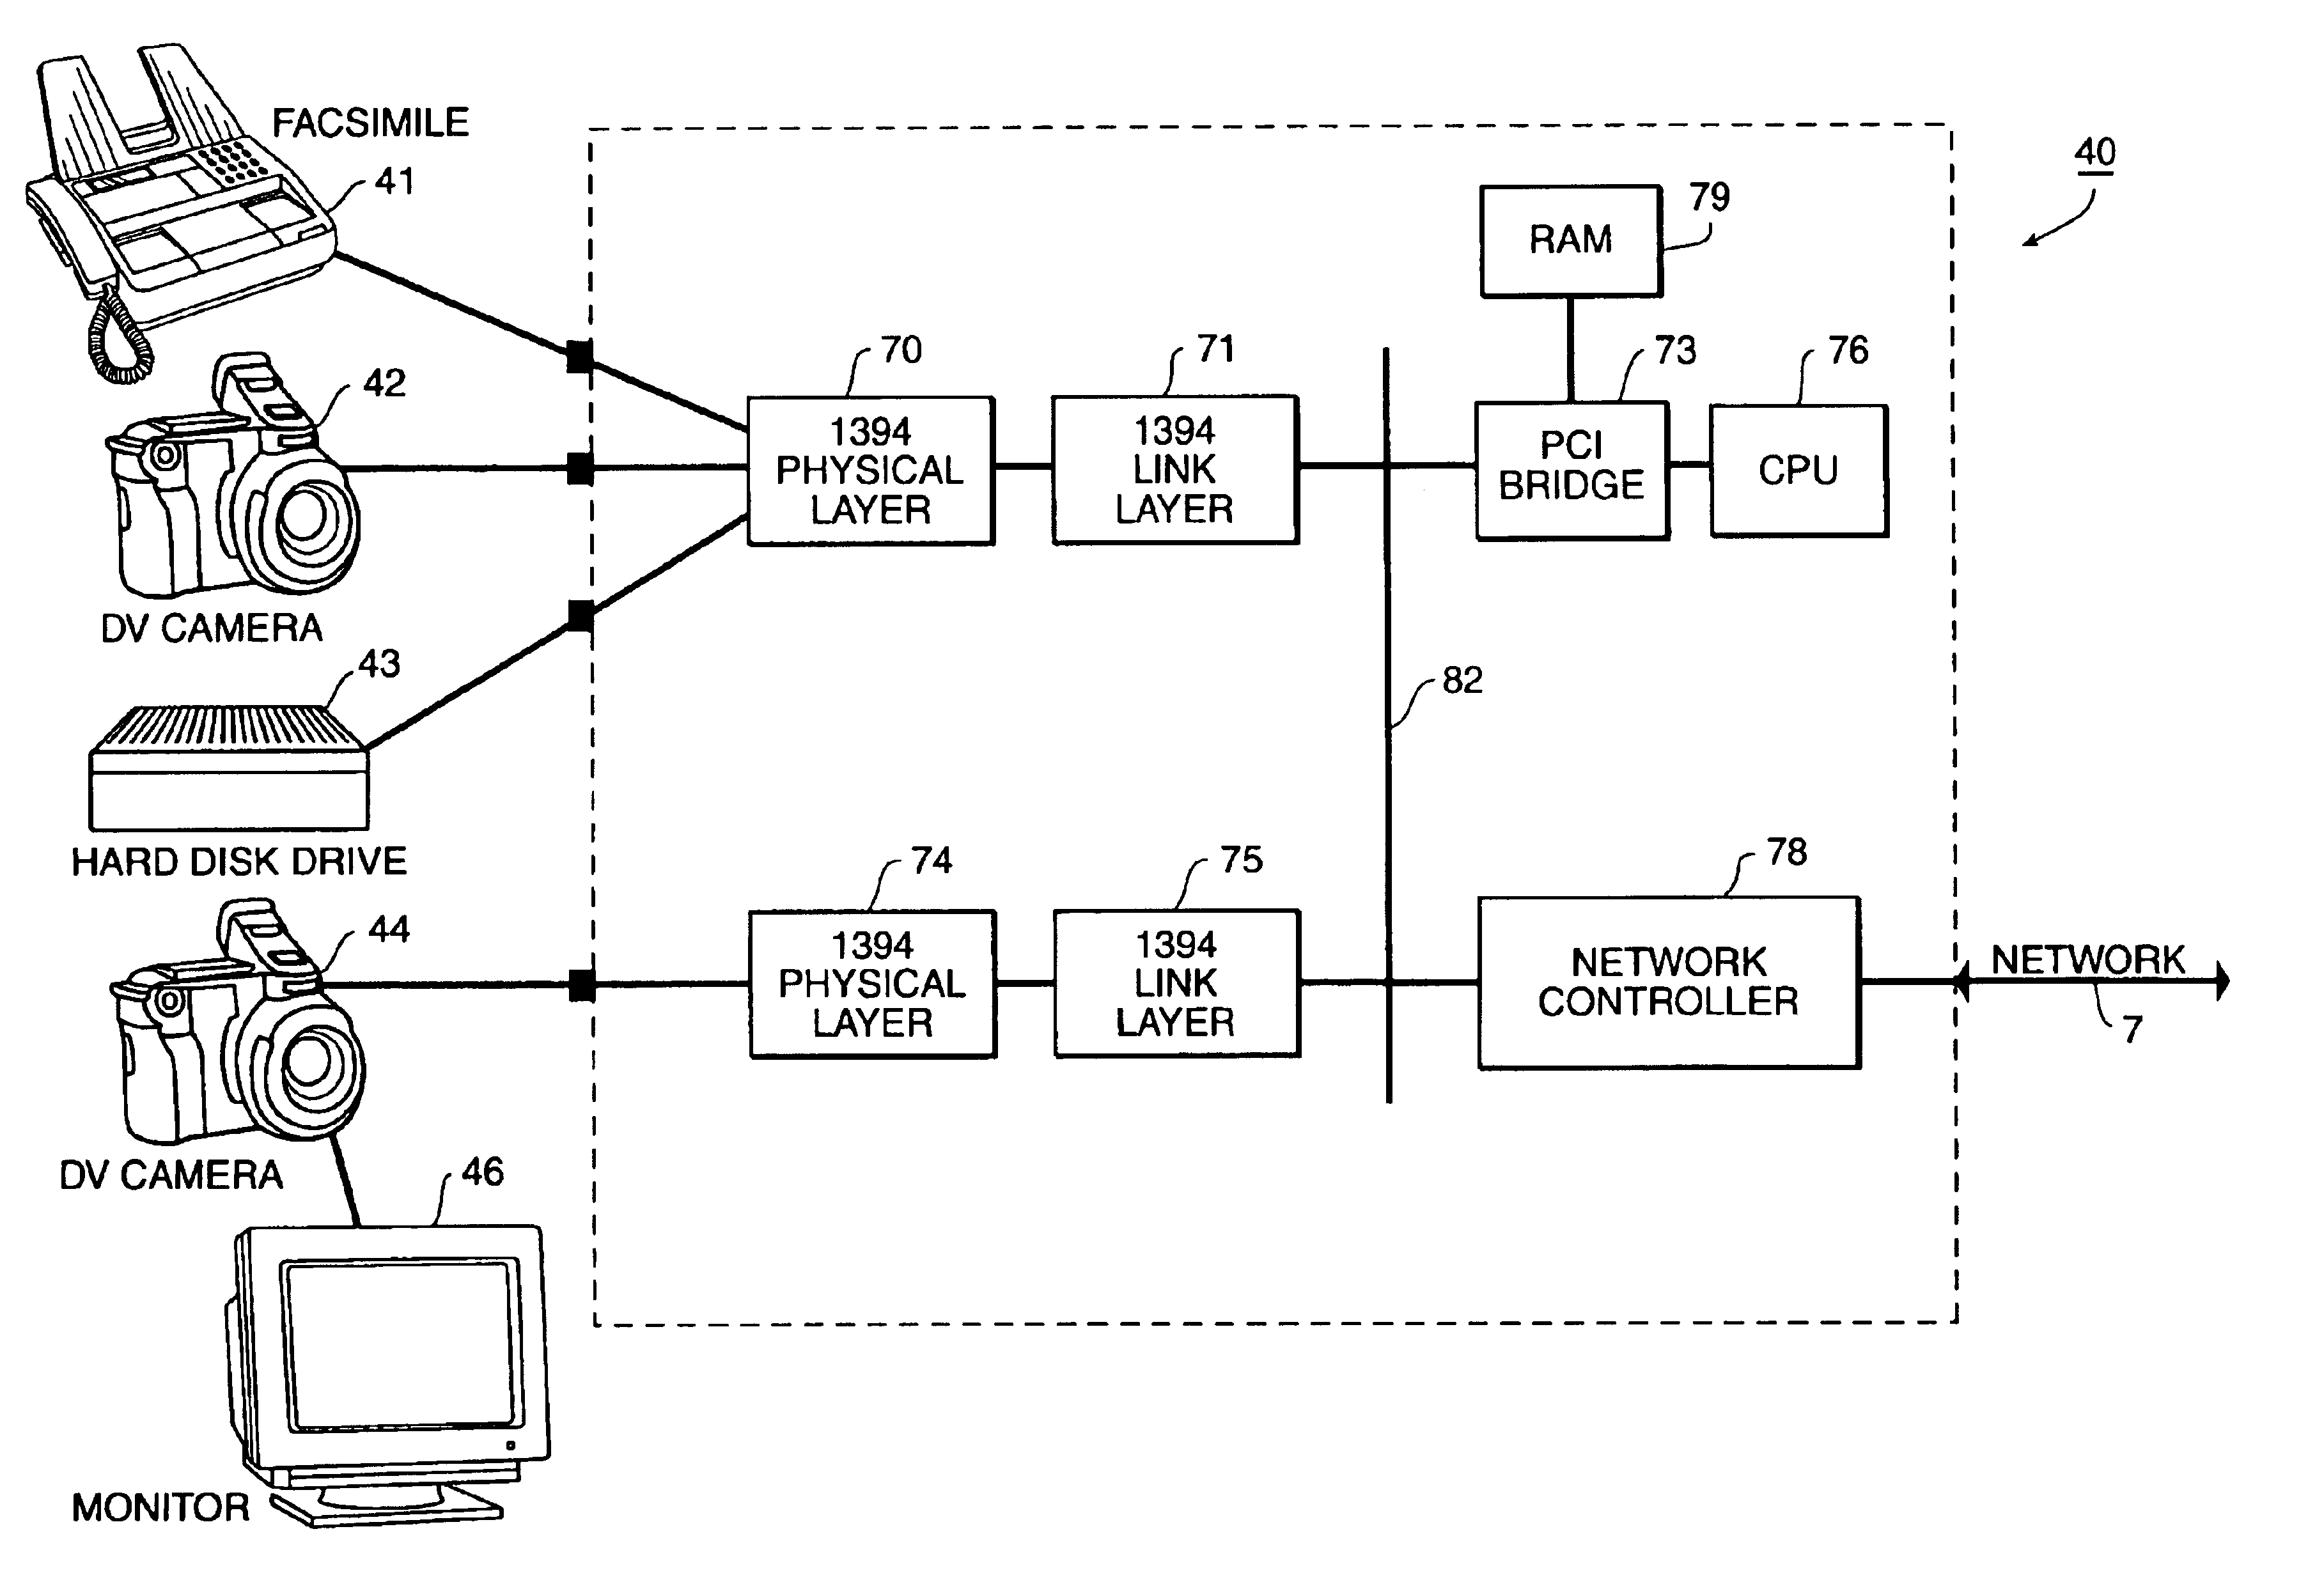 Channel protocol for IEEE 1394 data transmission